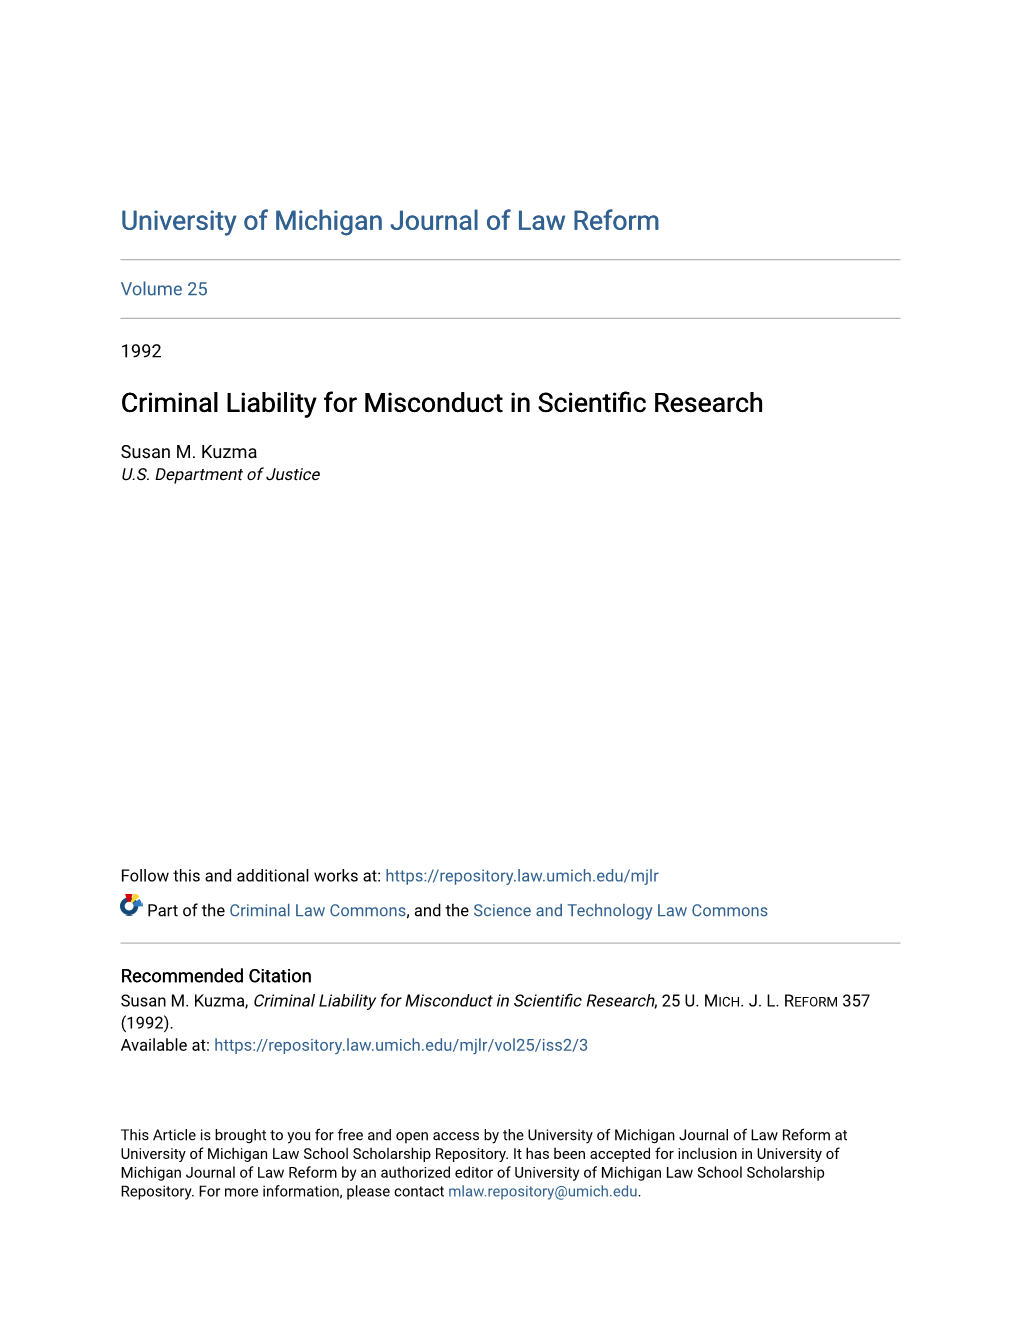 Criminal Liability for Misconduct in Scientific Research